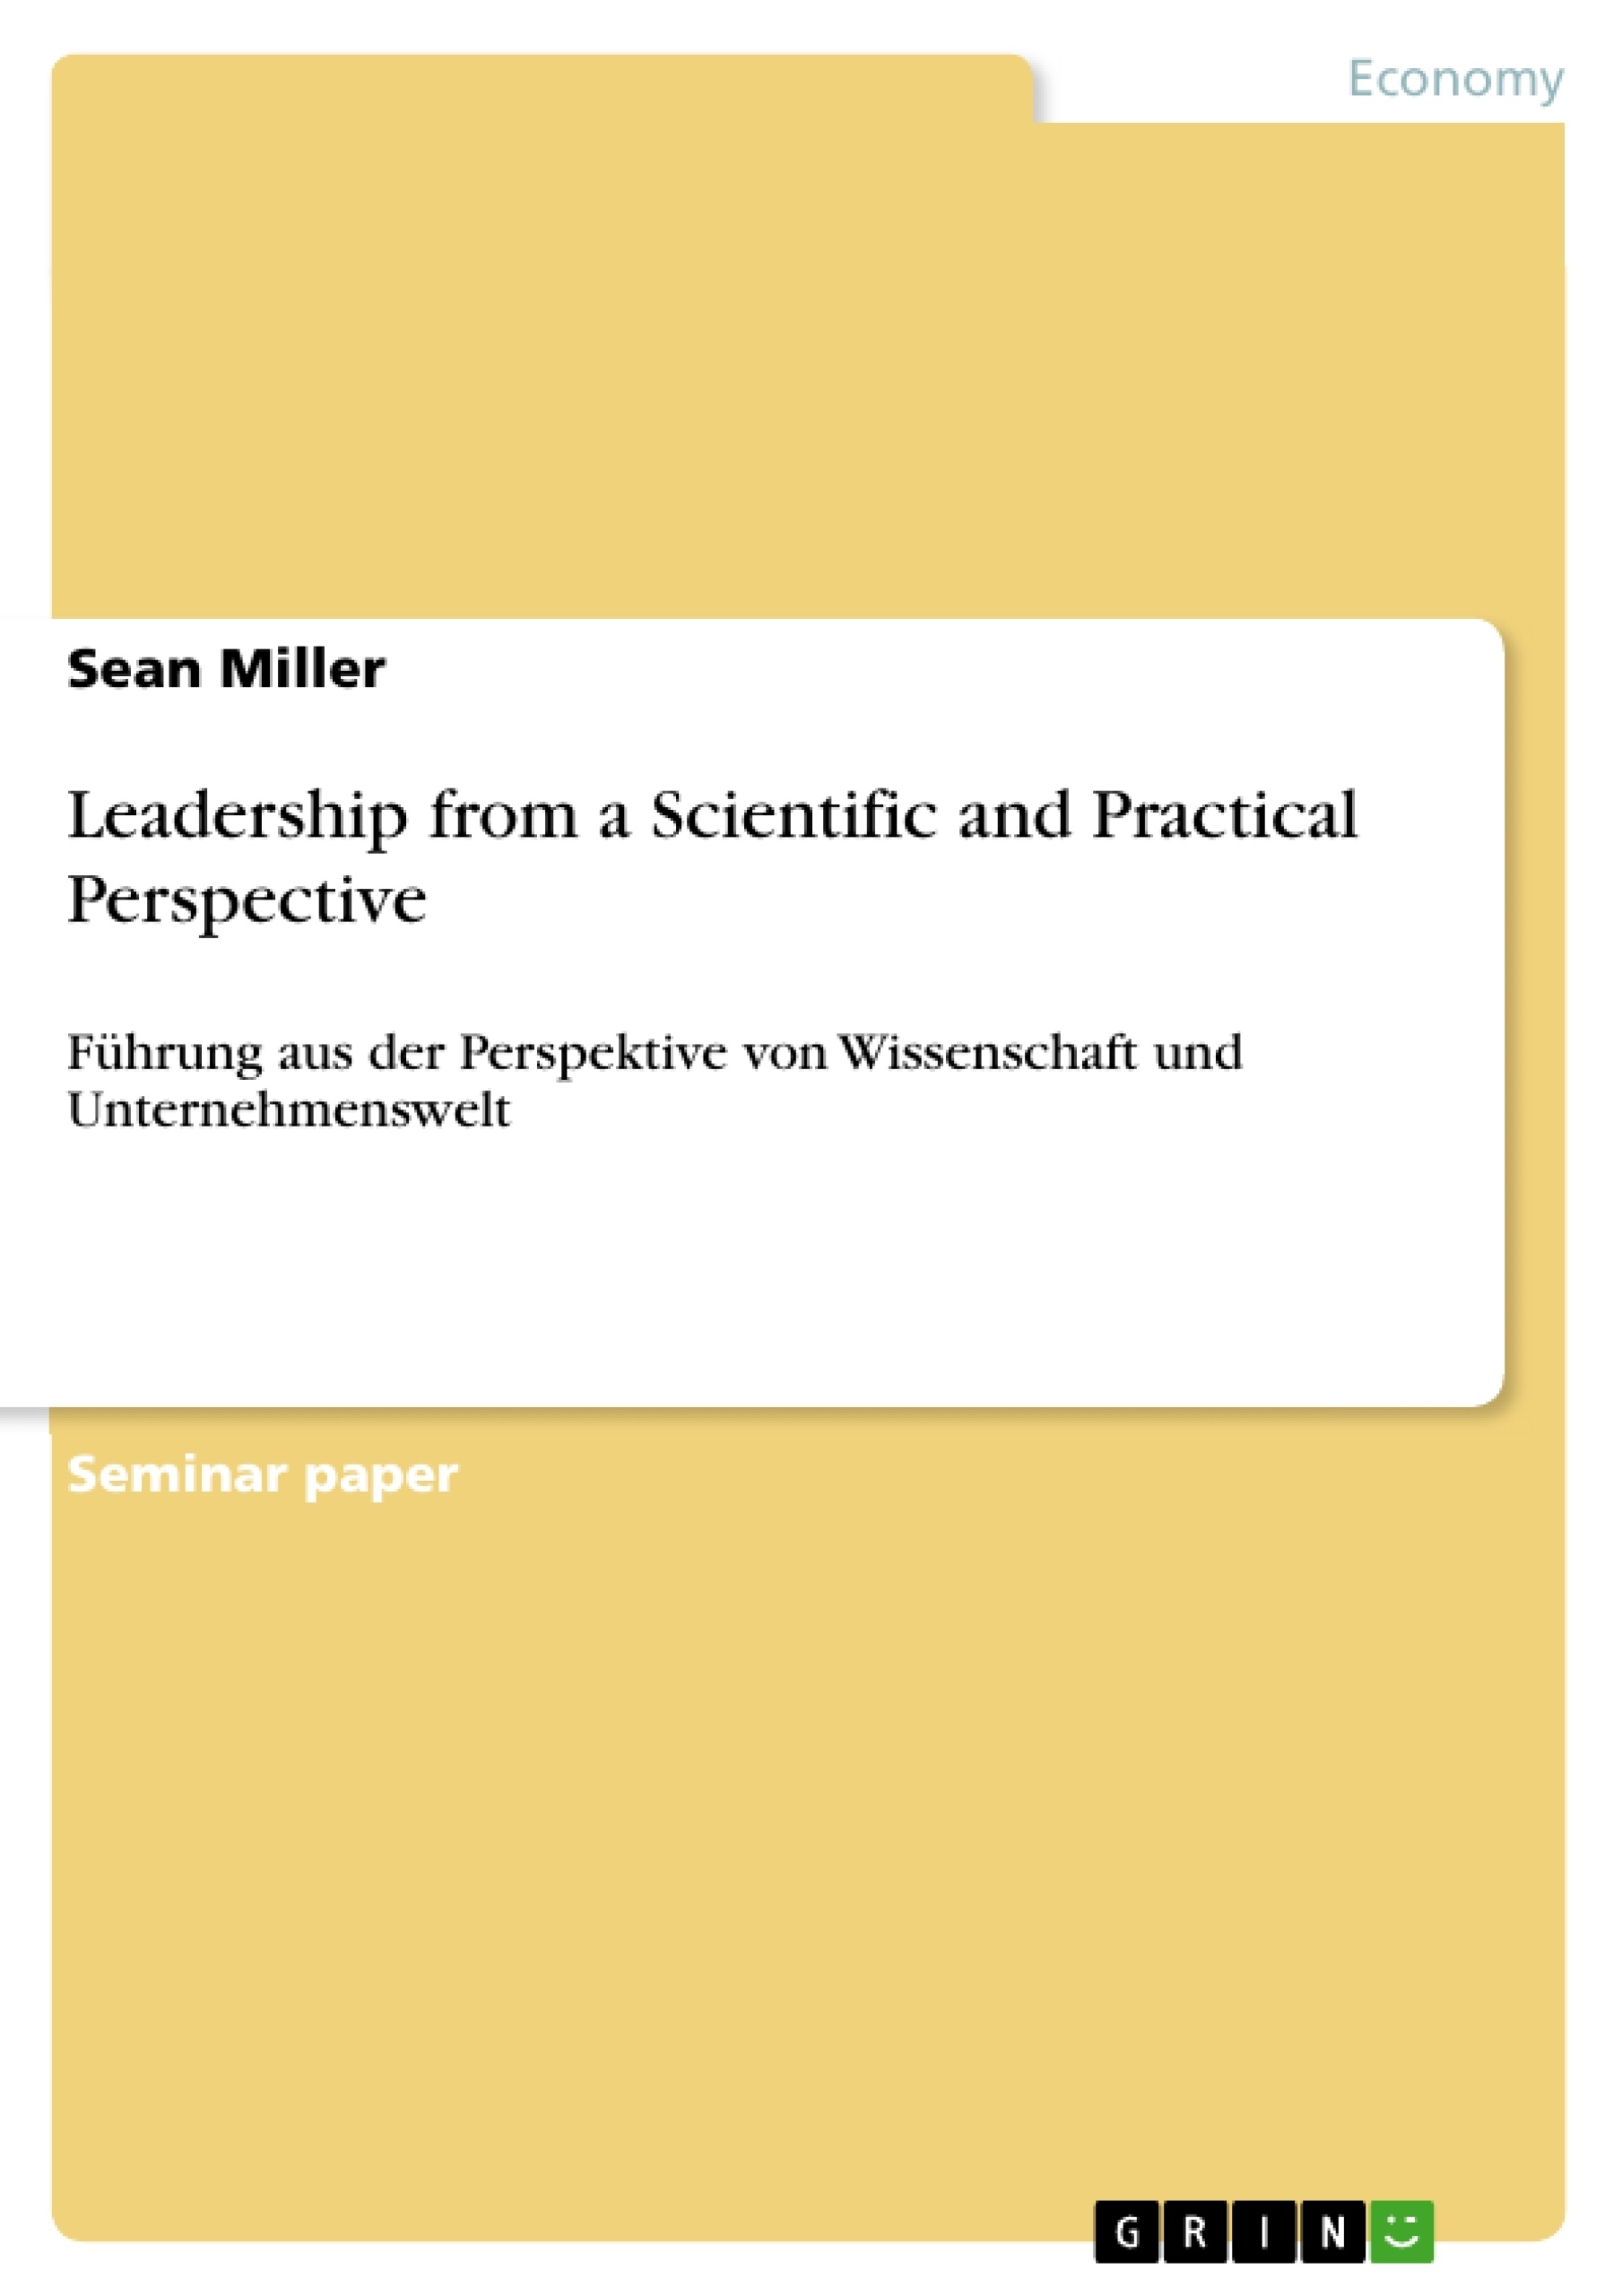 Title: Leadership from a Scientific and Practical Perspective